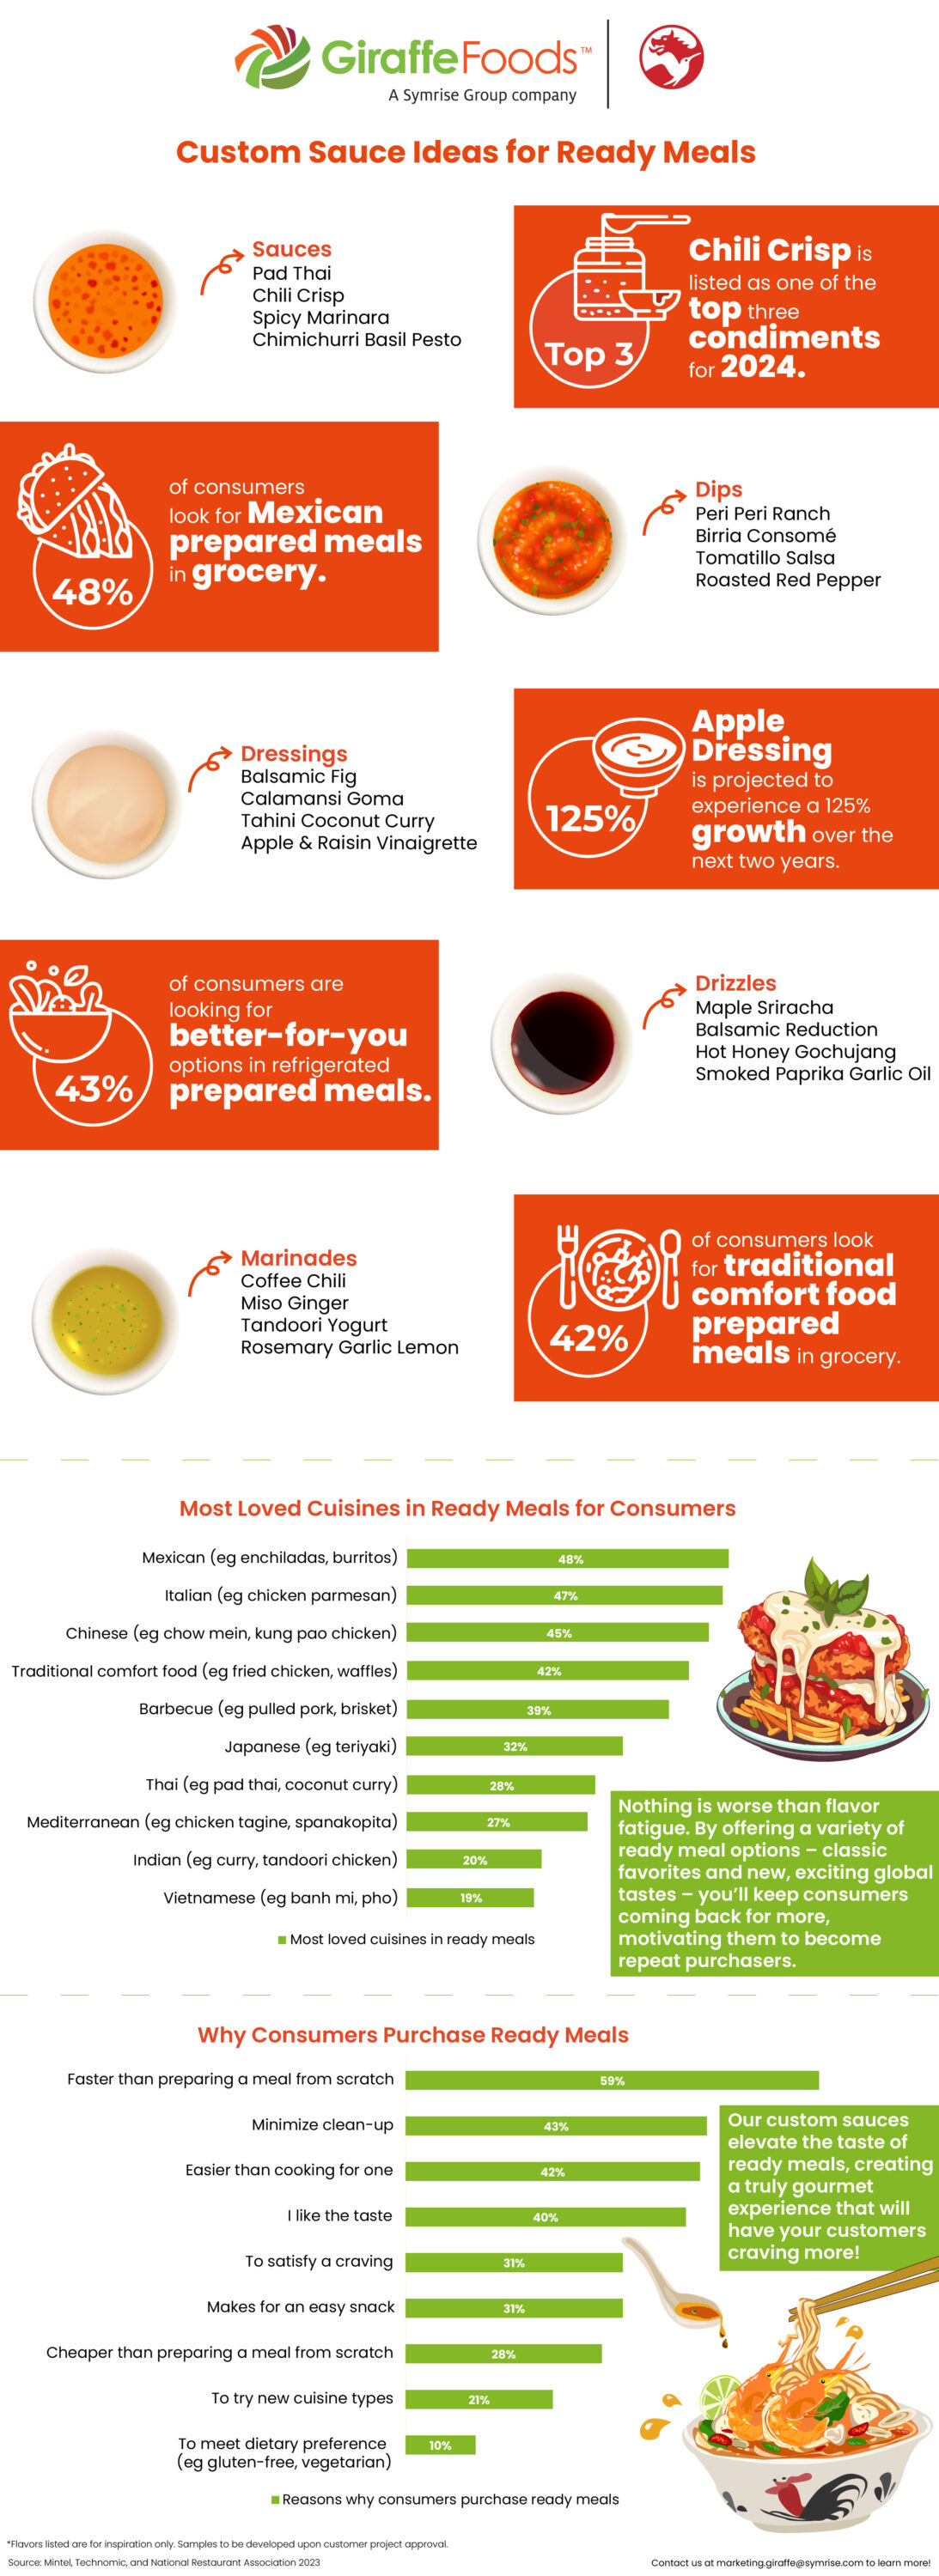 custom-sauces-for-ready-meals-infographic